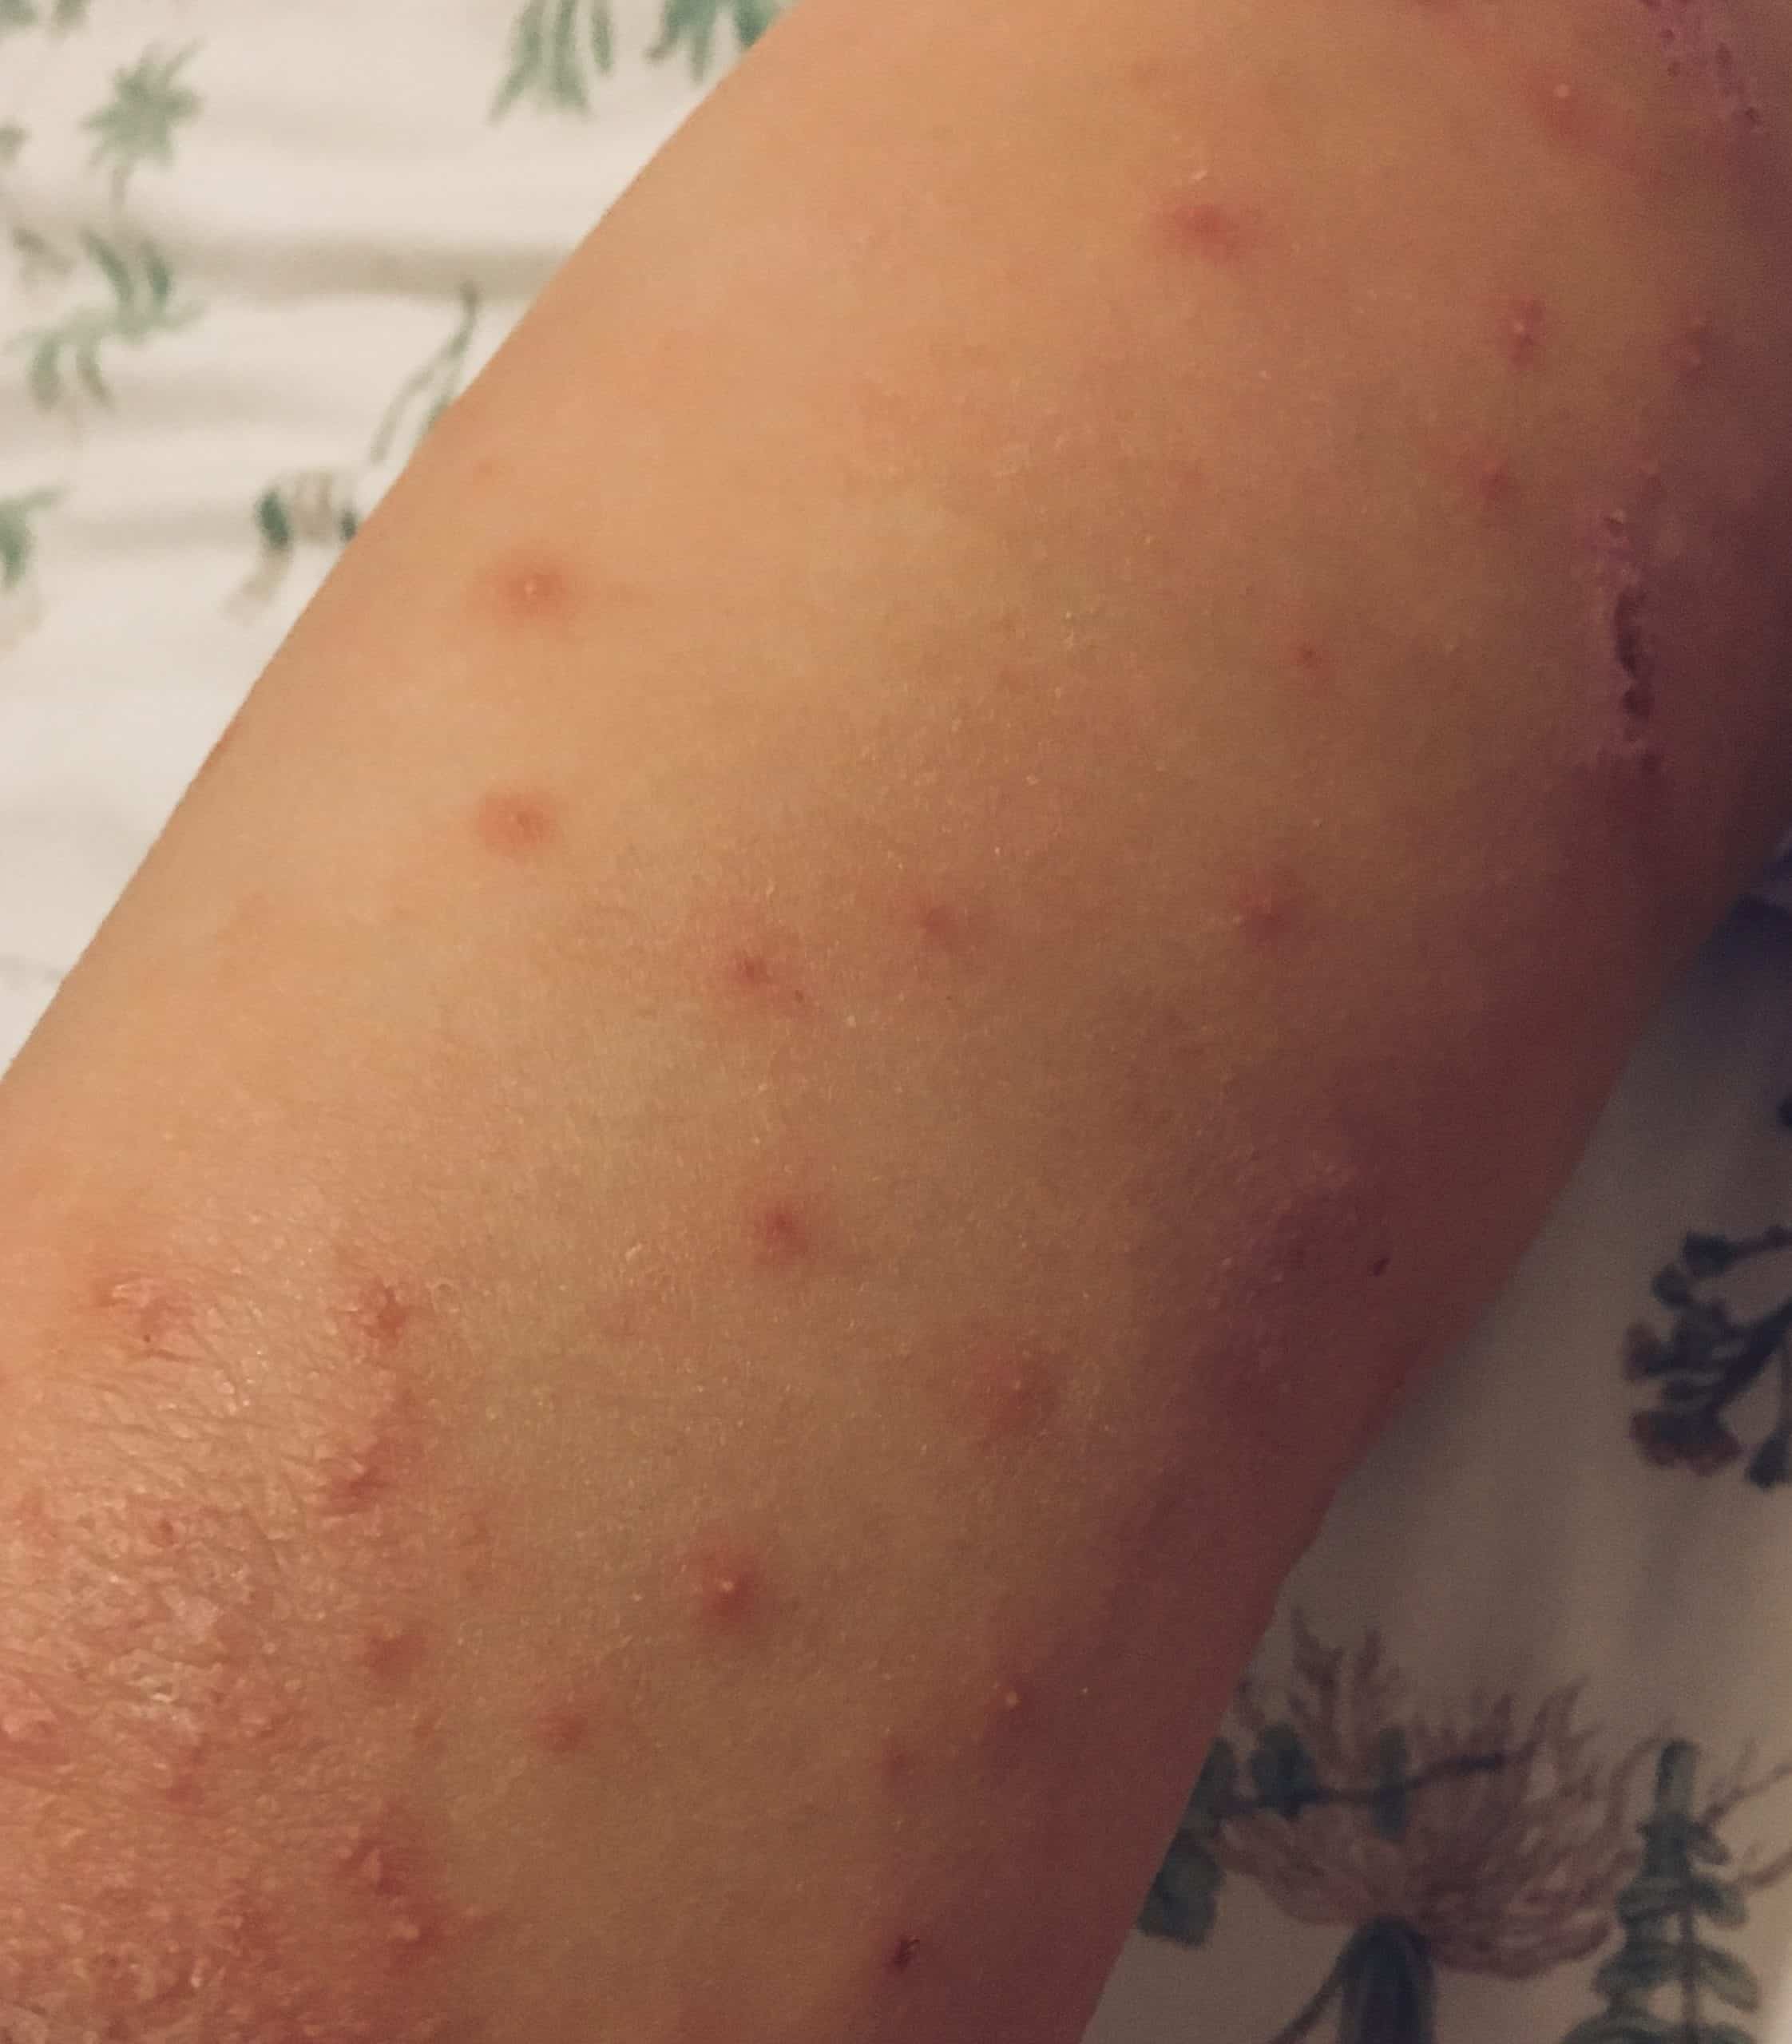 Ivy, Eczema, and a Bacterial Infection